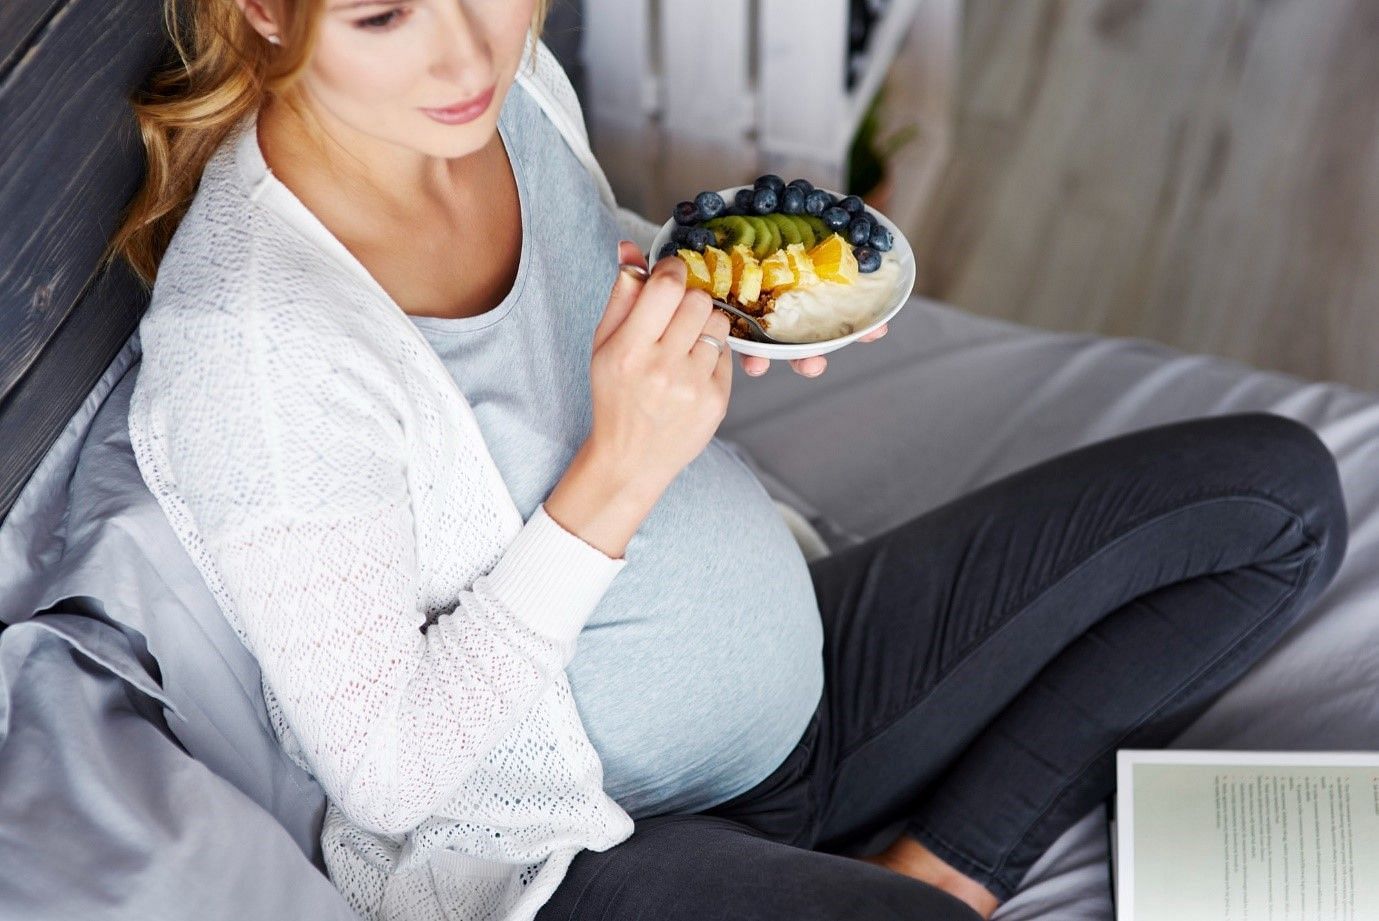 What are the things to avoid in early pregnancy? (image by gpointstudio on freepik)